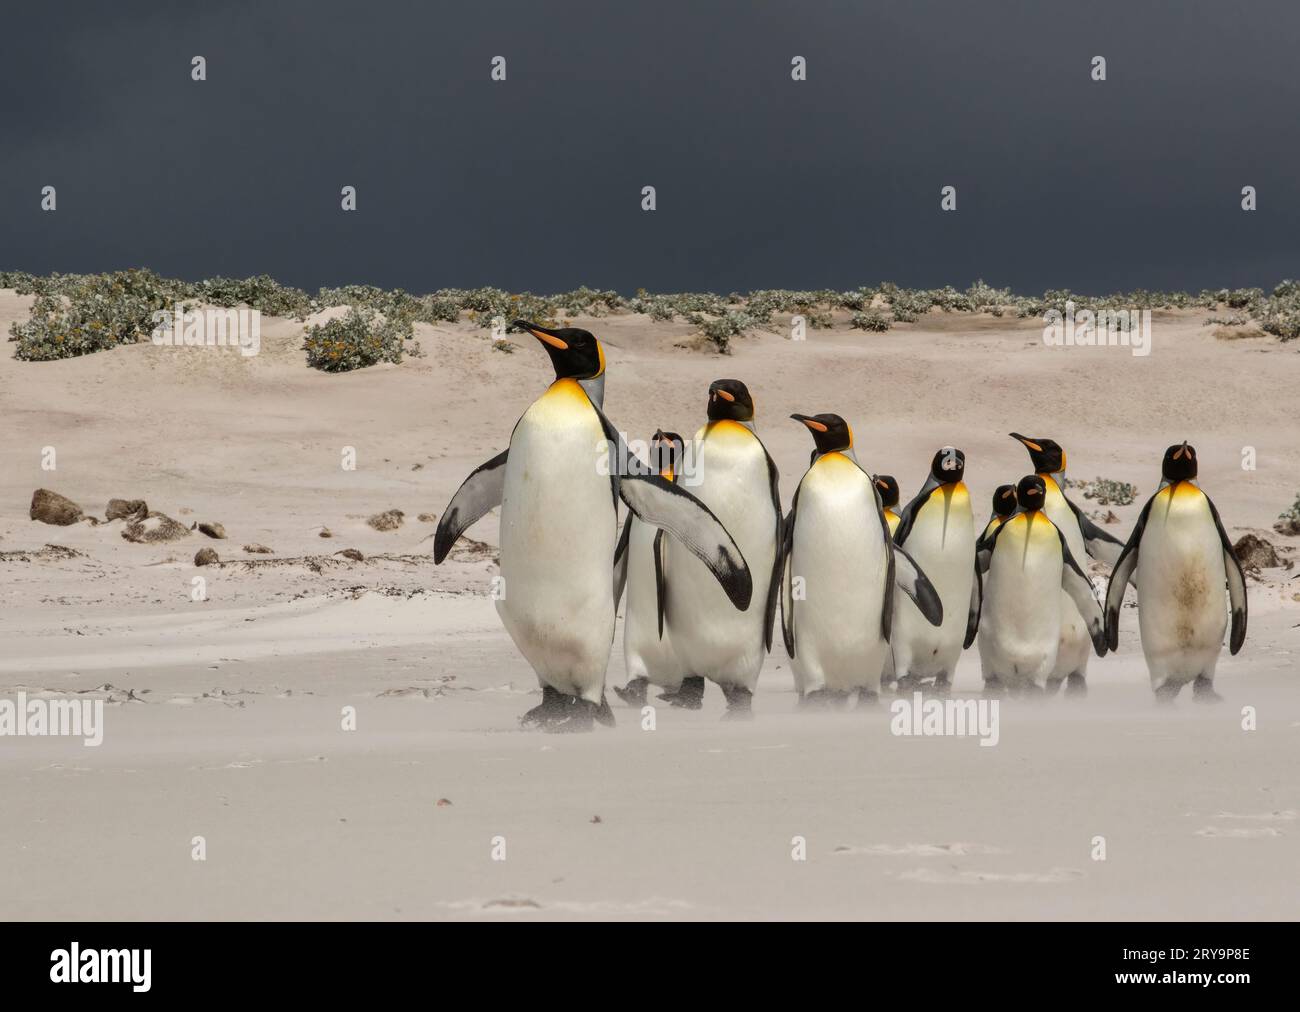 King Penguin Flock on the March Stock Photo